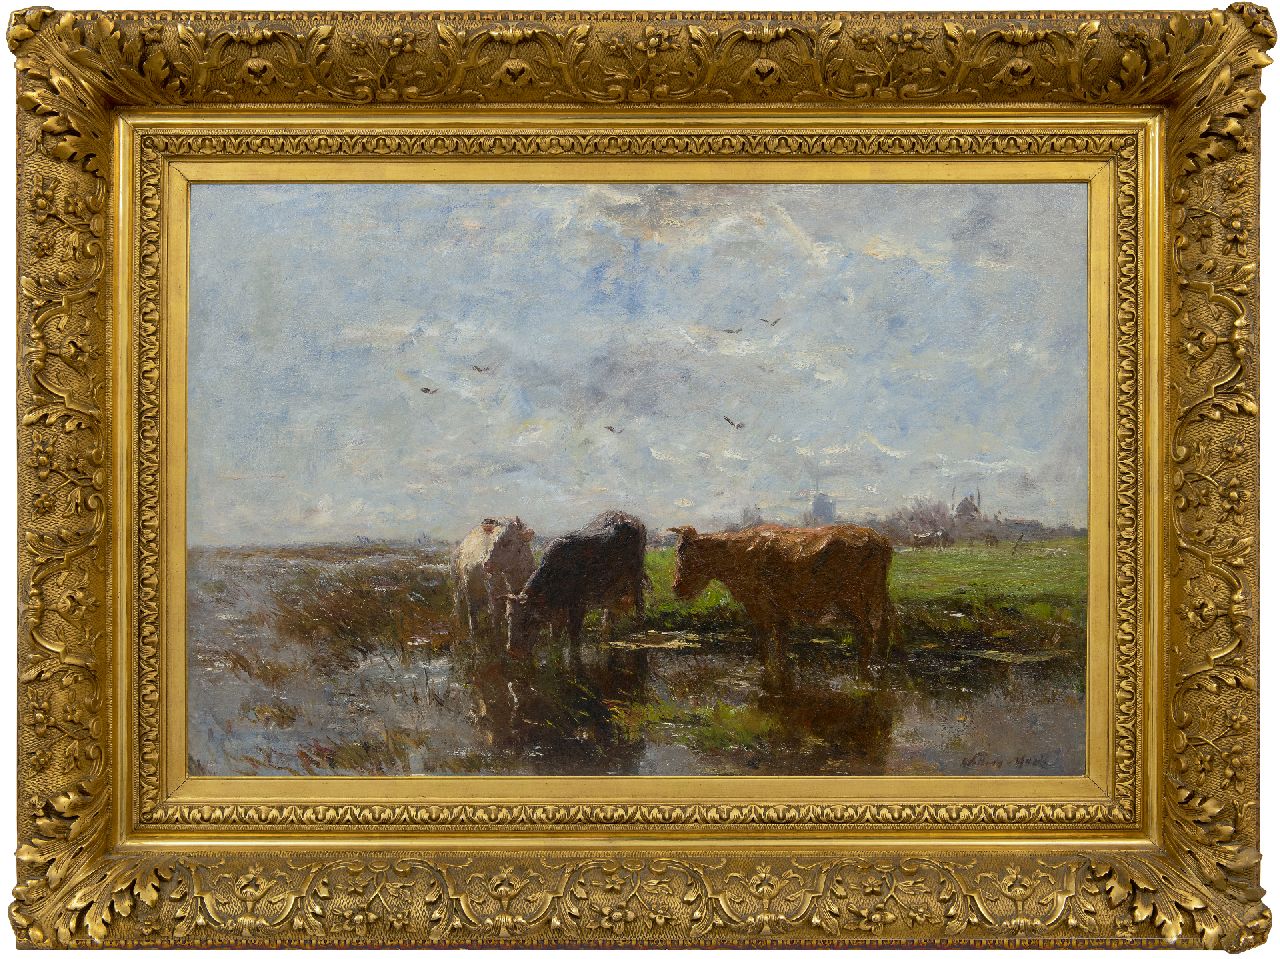 Maris W.  | Willem Maris | Paintings offered for sale | Drinking cows in a polder landscape, oil on canvas 58.2 x 85.2 cm, signed l.r.